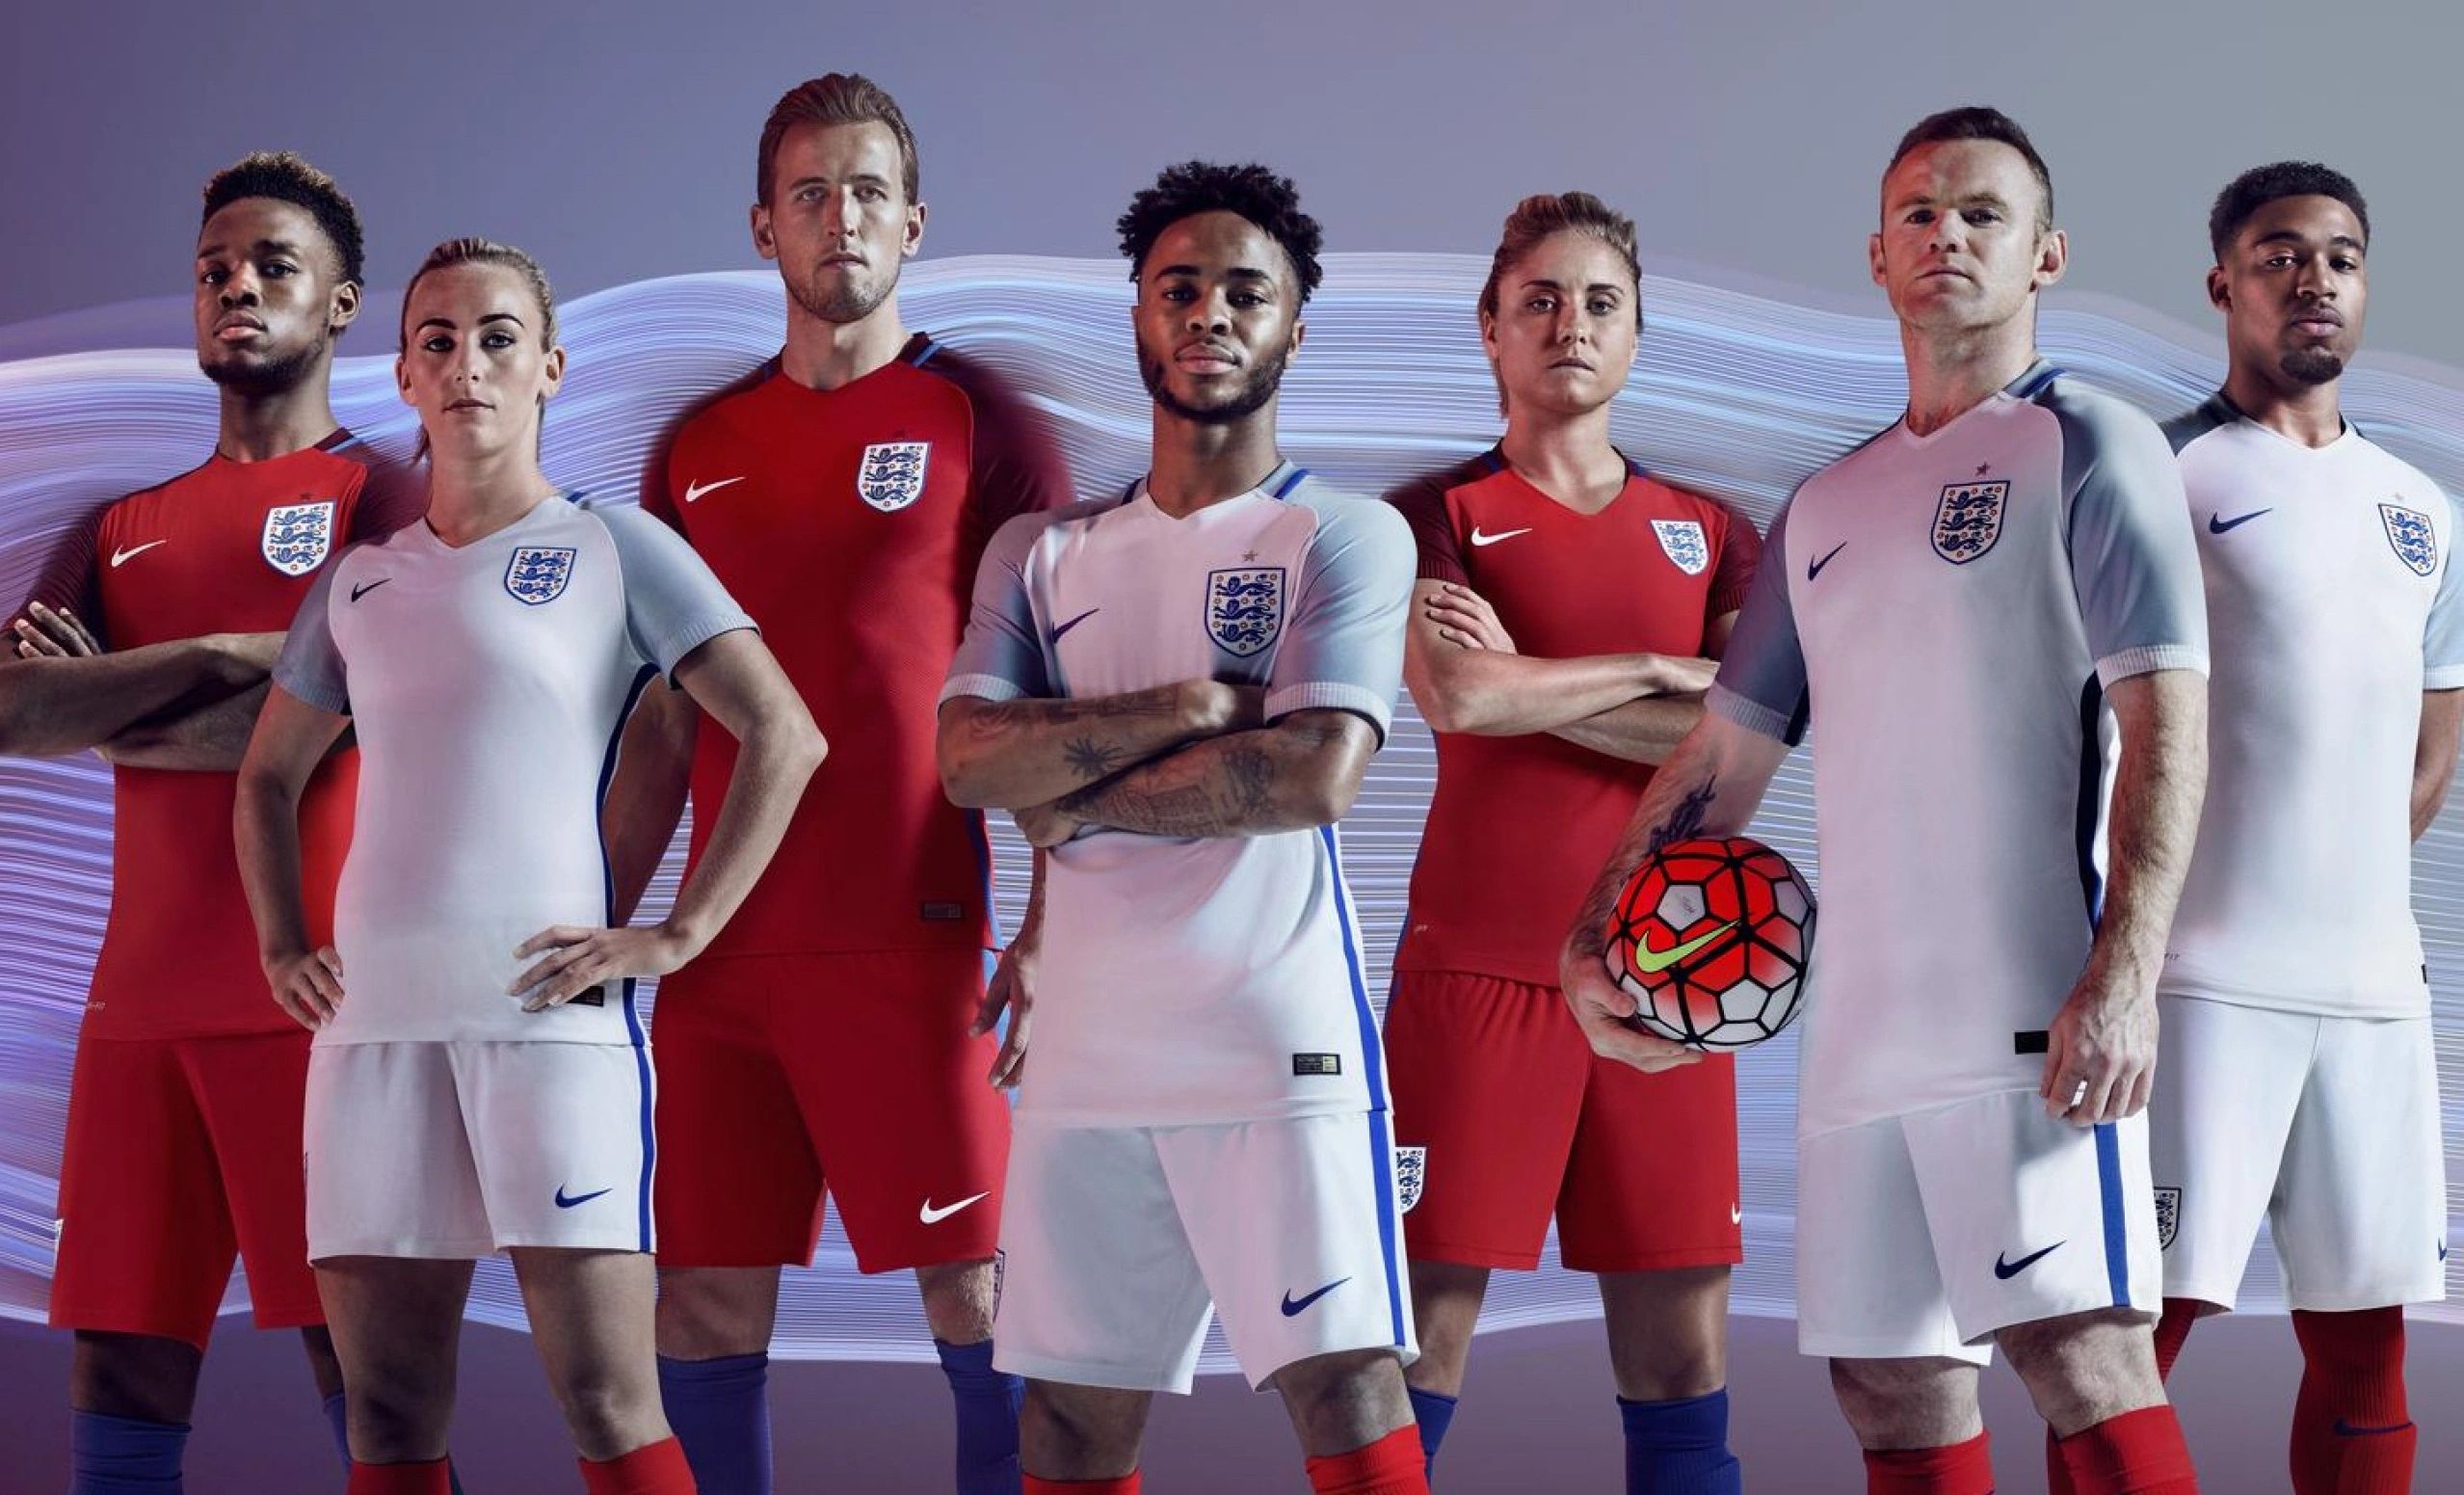 England Fc Latest News From The England Fc England Fc Latest News From The England Fc